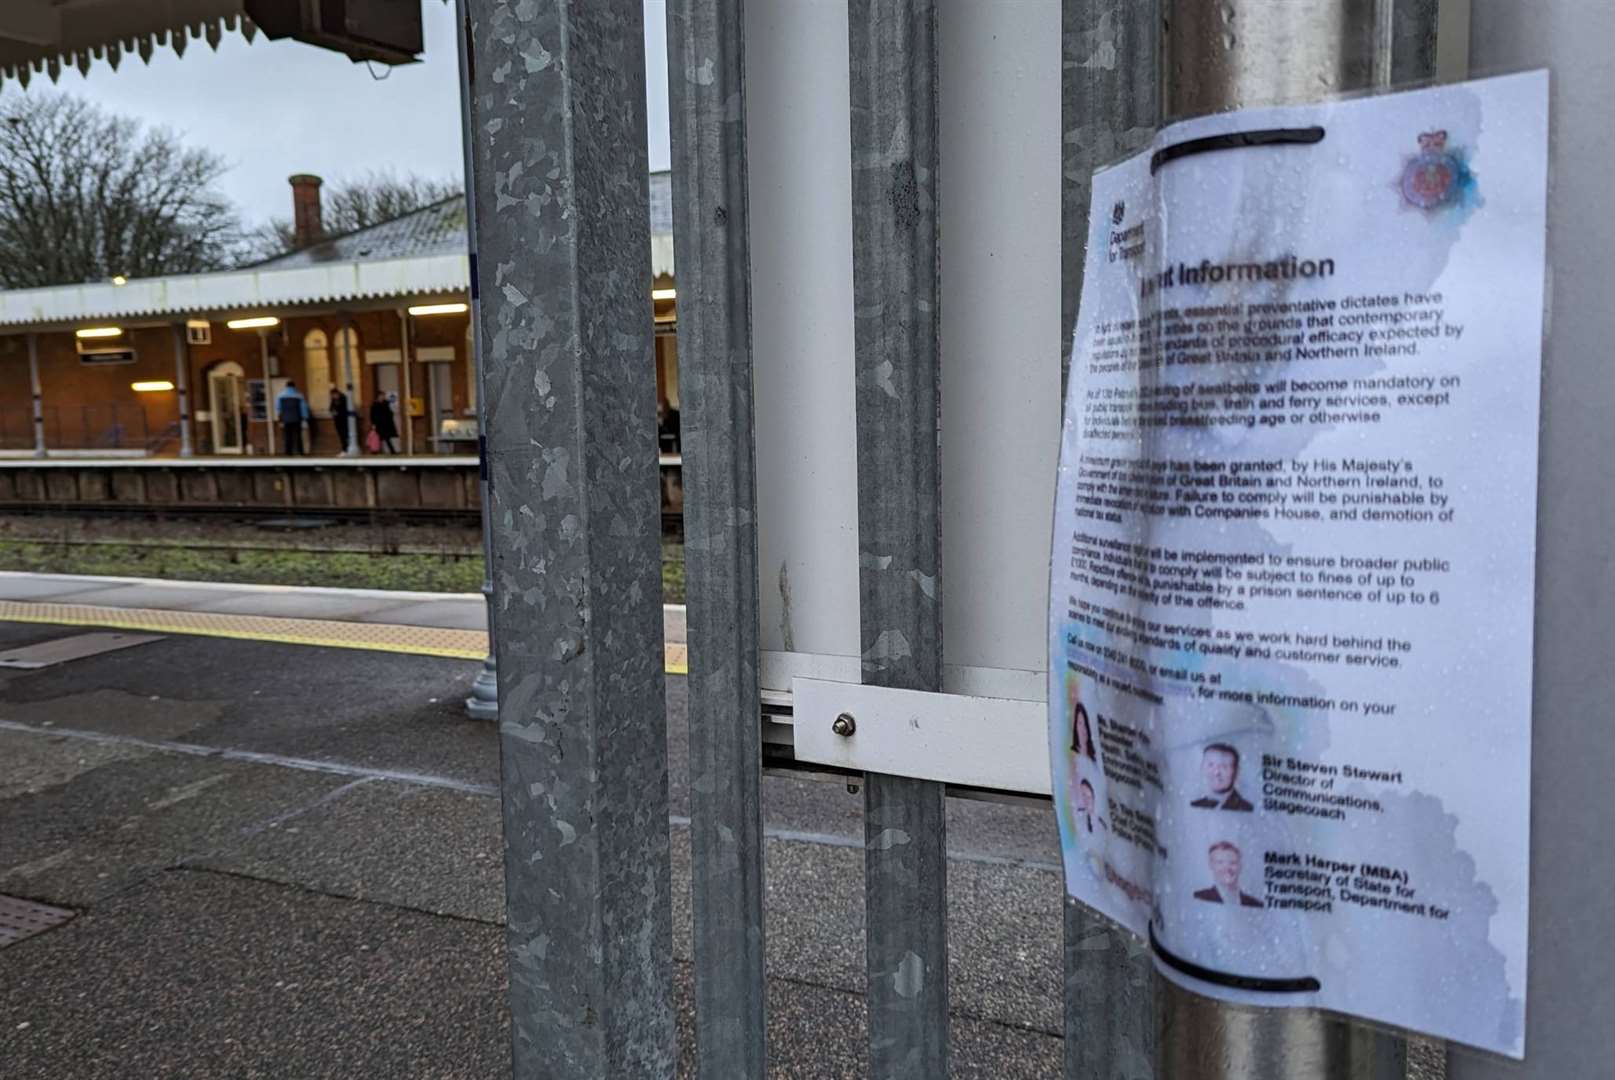 The fake notices have been posted at Folkestone West railway station and at bus stops